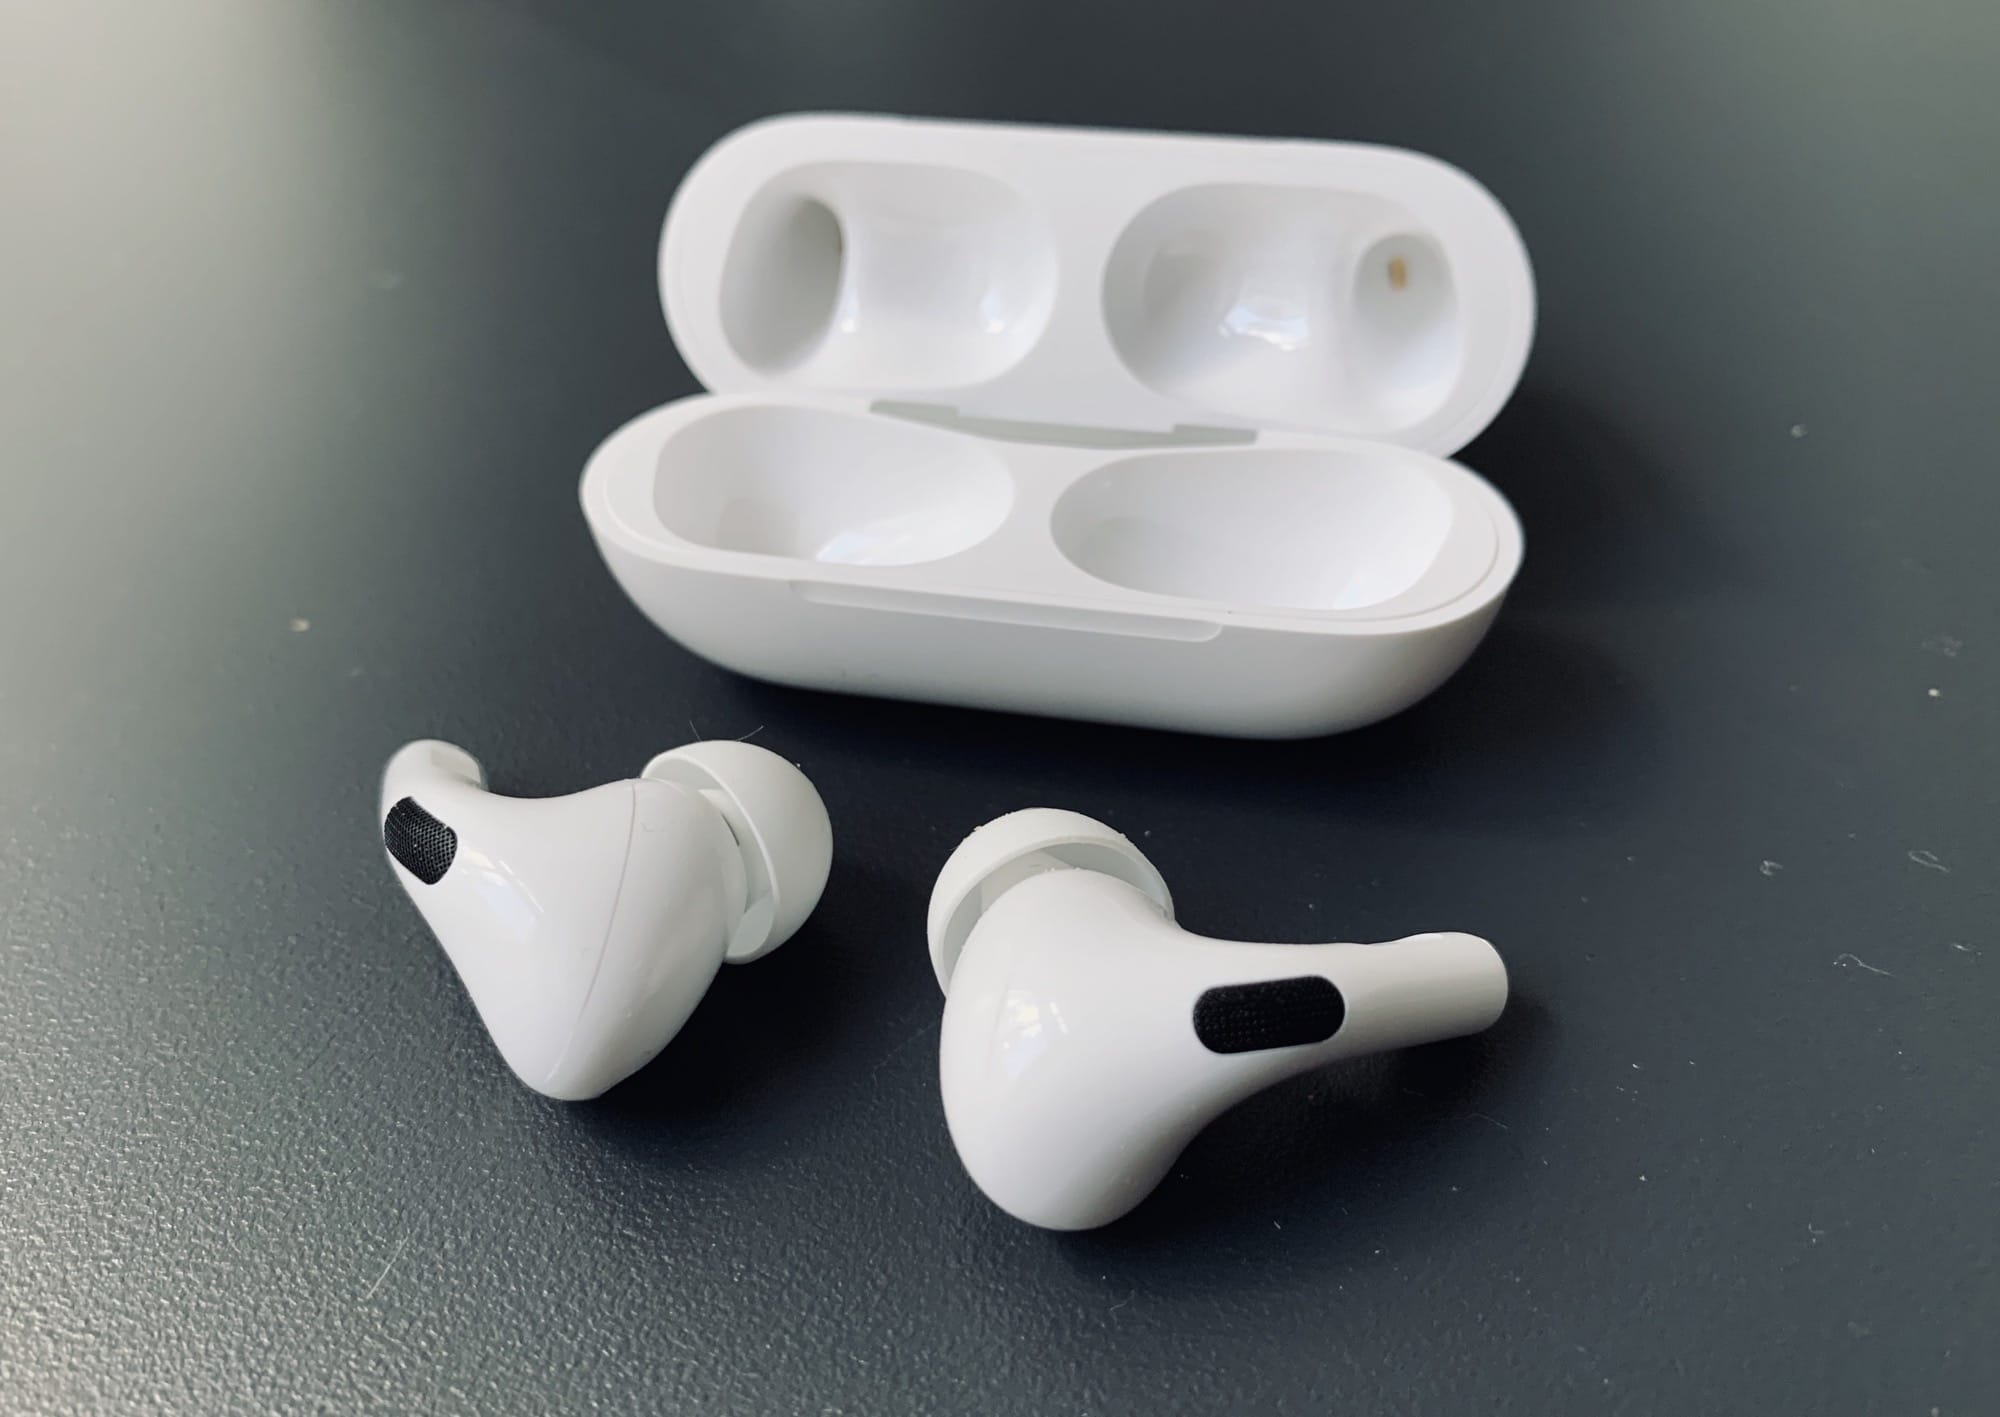 AirPods supplier confident of booming business through 2021